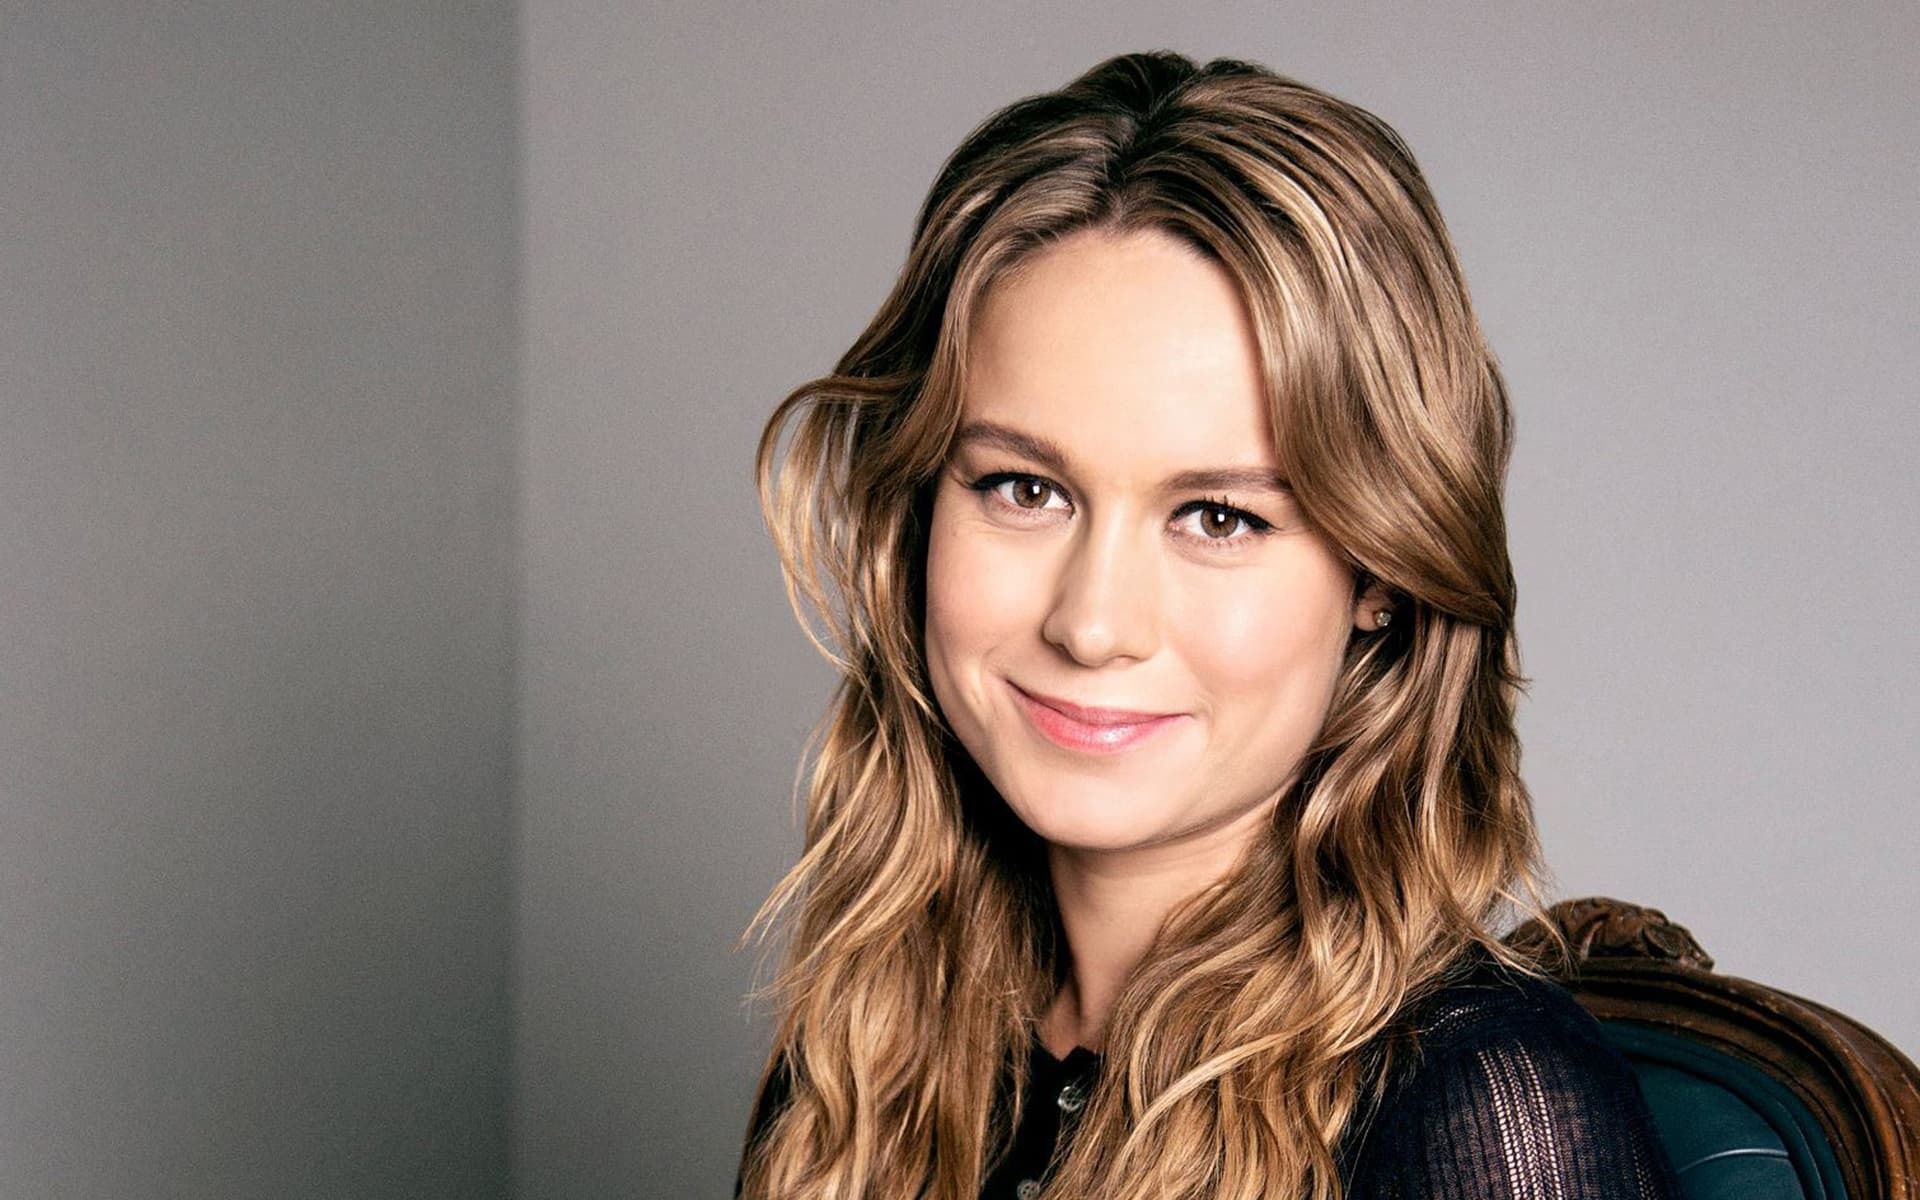 Brie Larson Room Actress Wallpapers